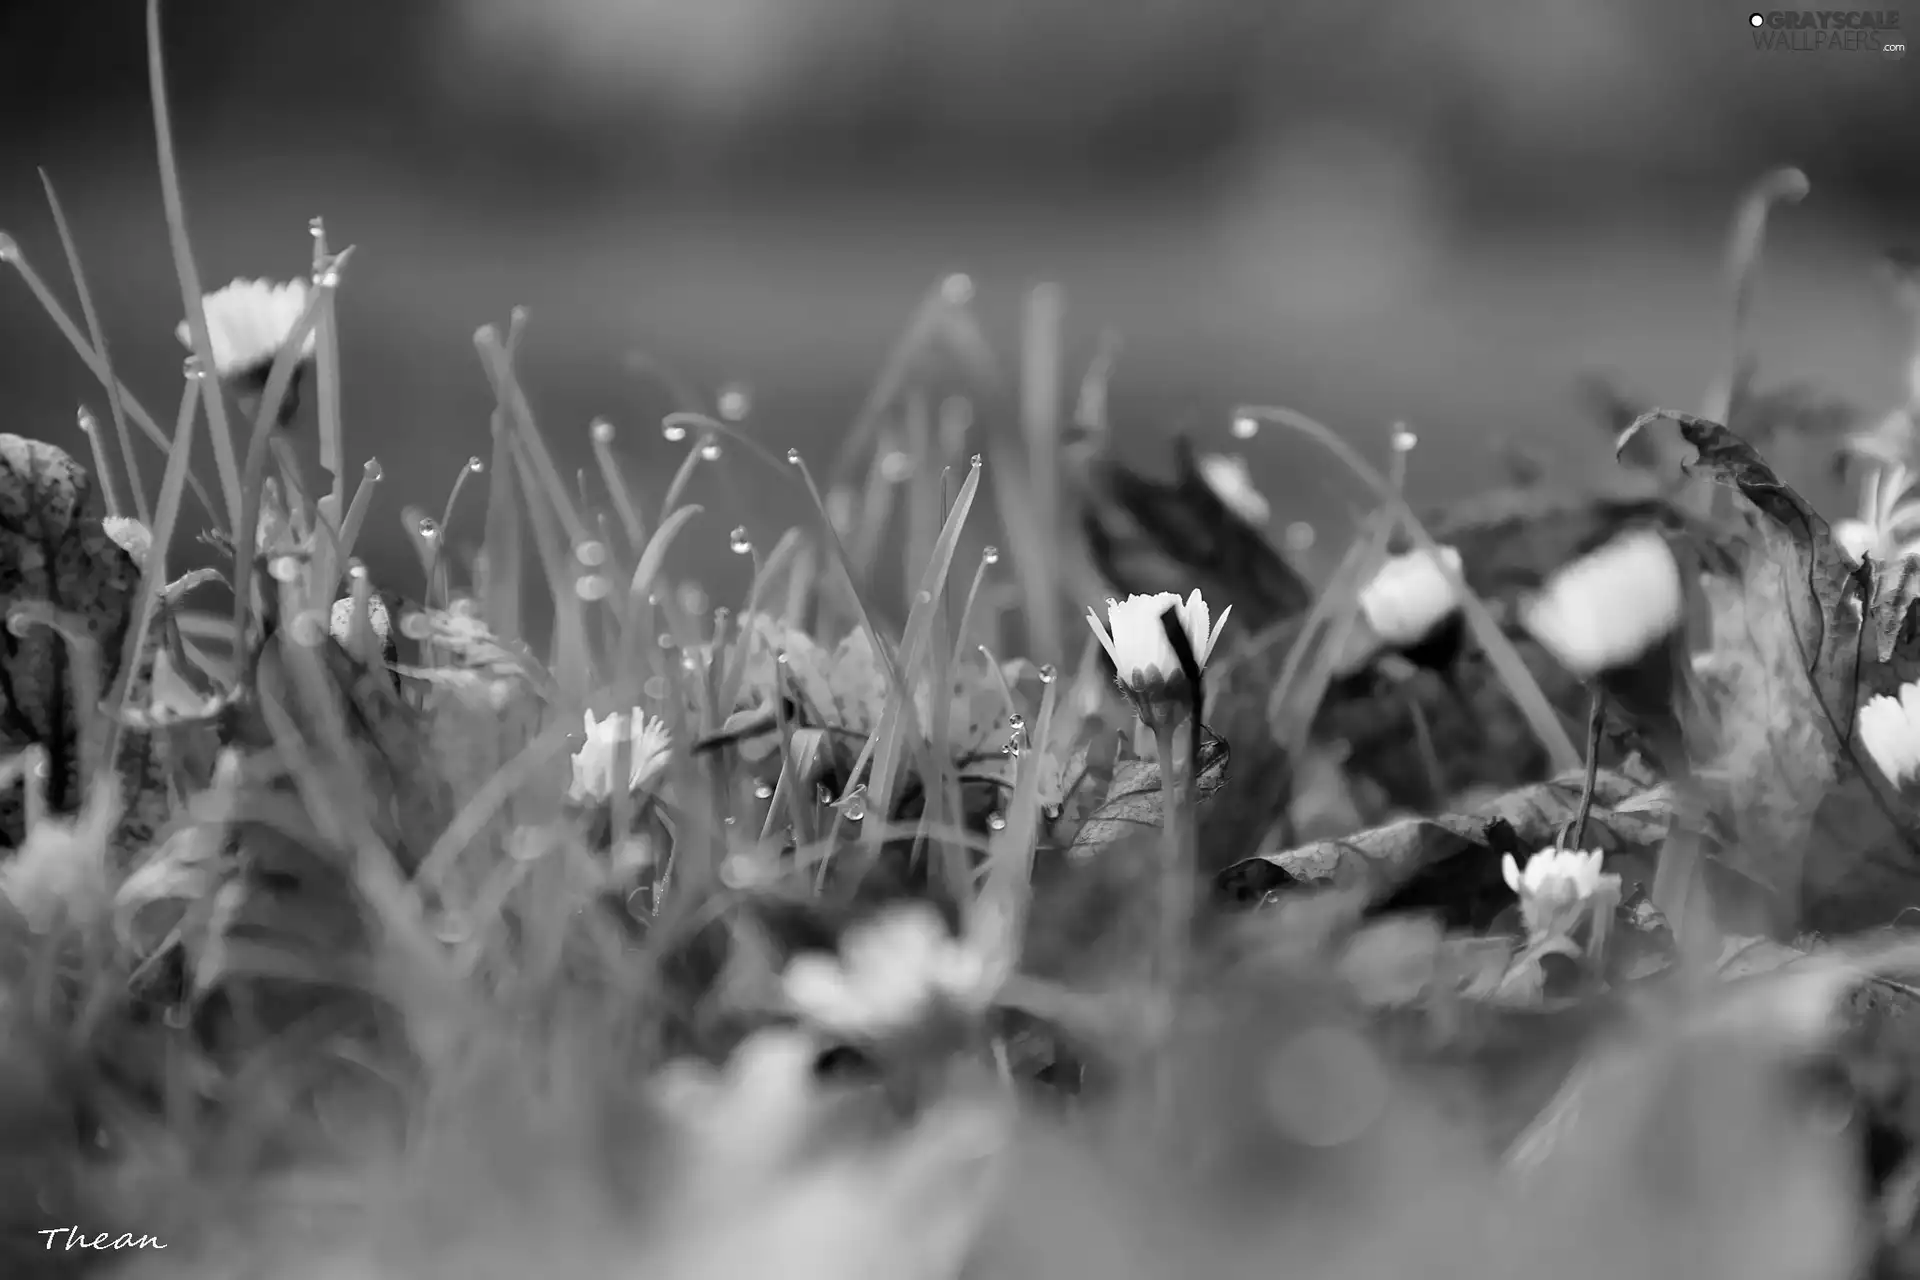 Leaf, droplets, daisies, dry, grass